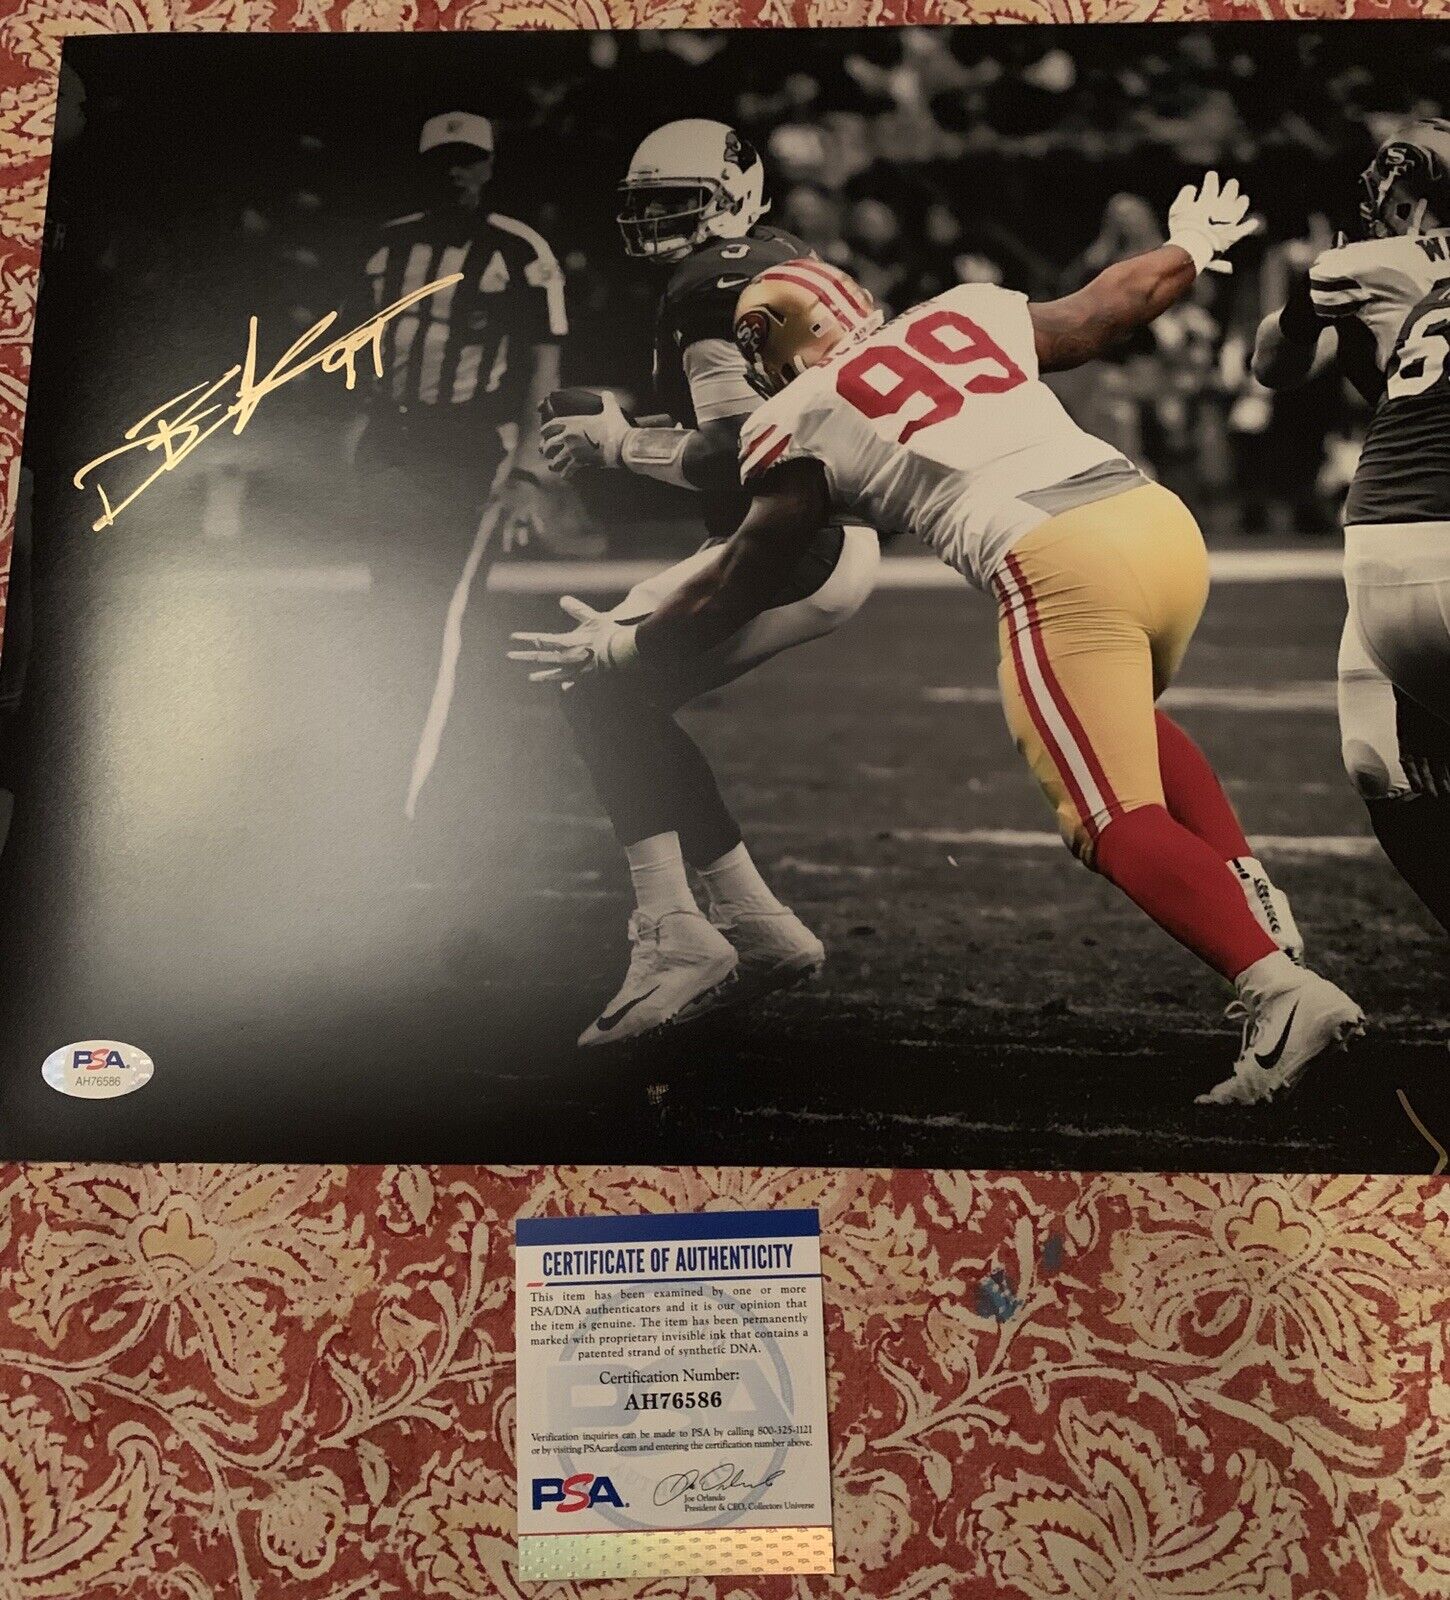 deforest buckner Signed Photo Poster painting 8x10 Niners